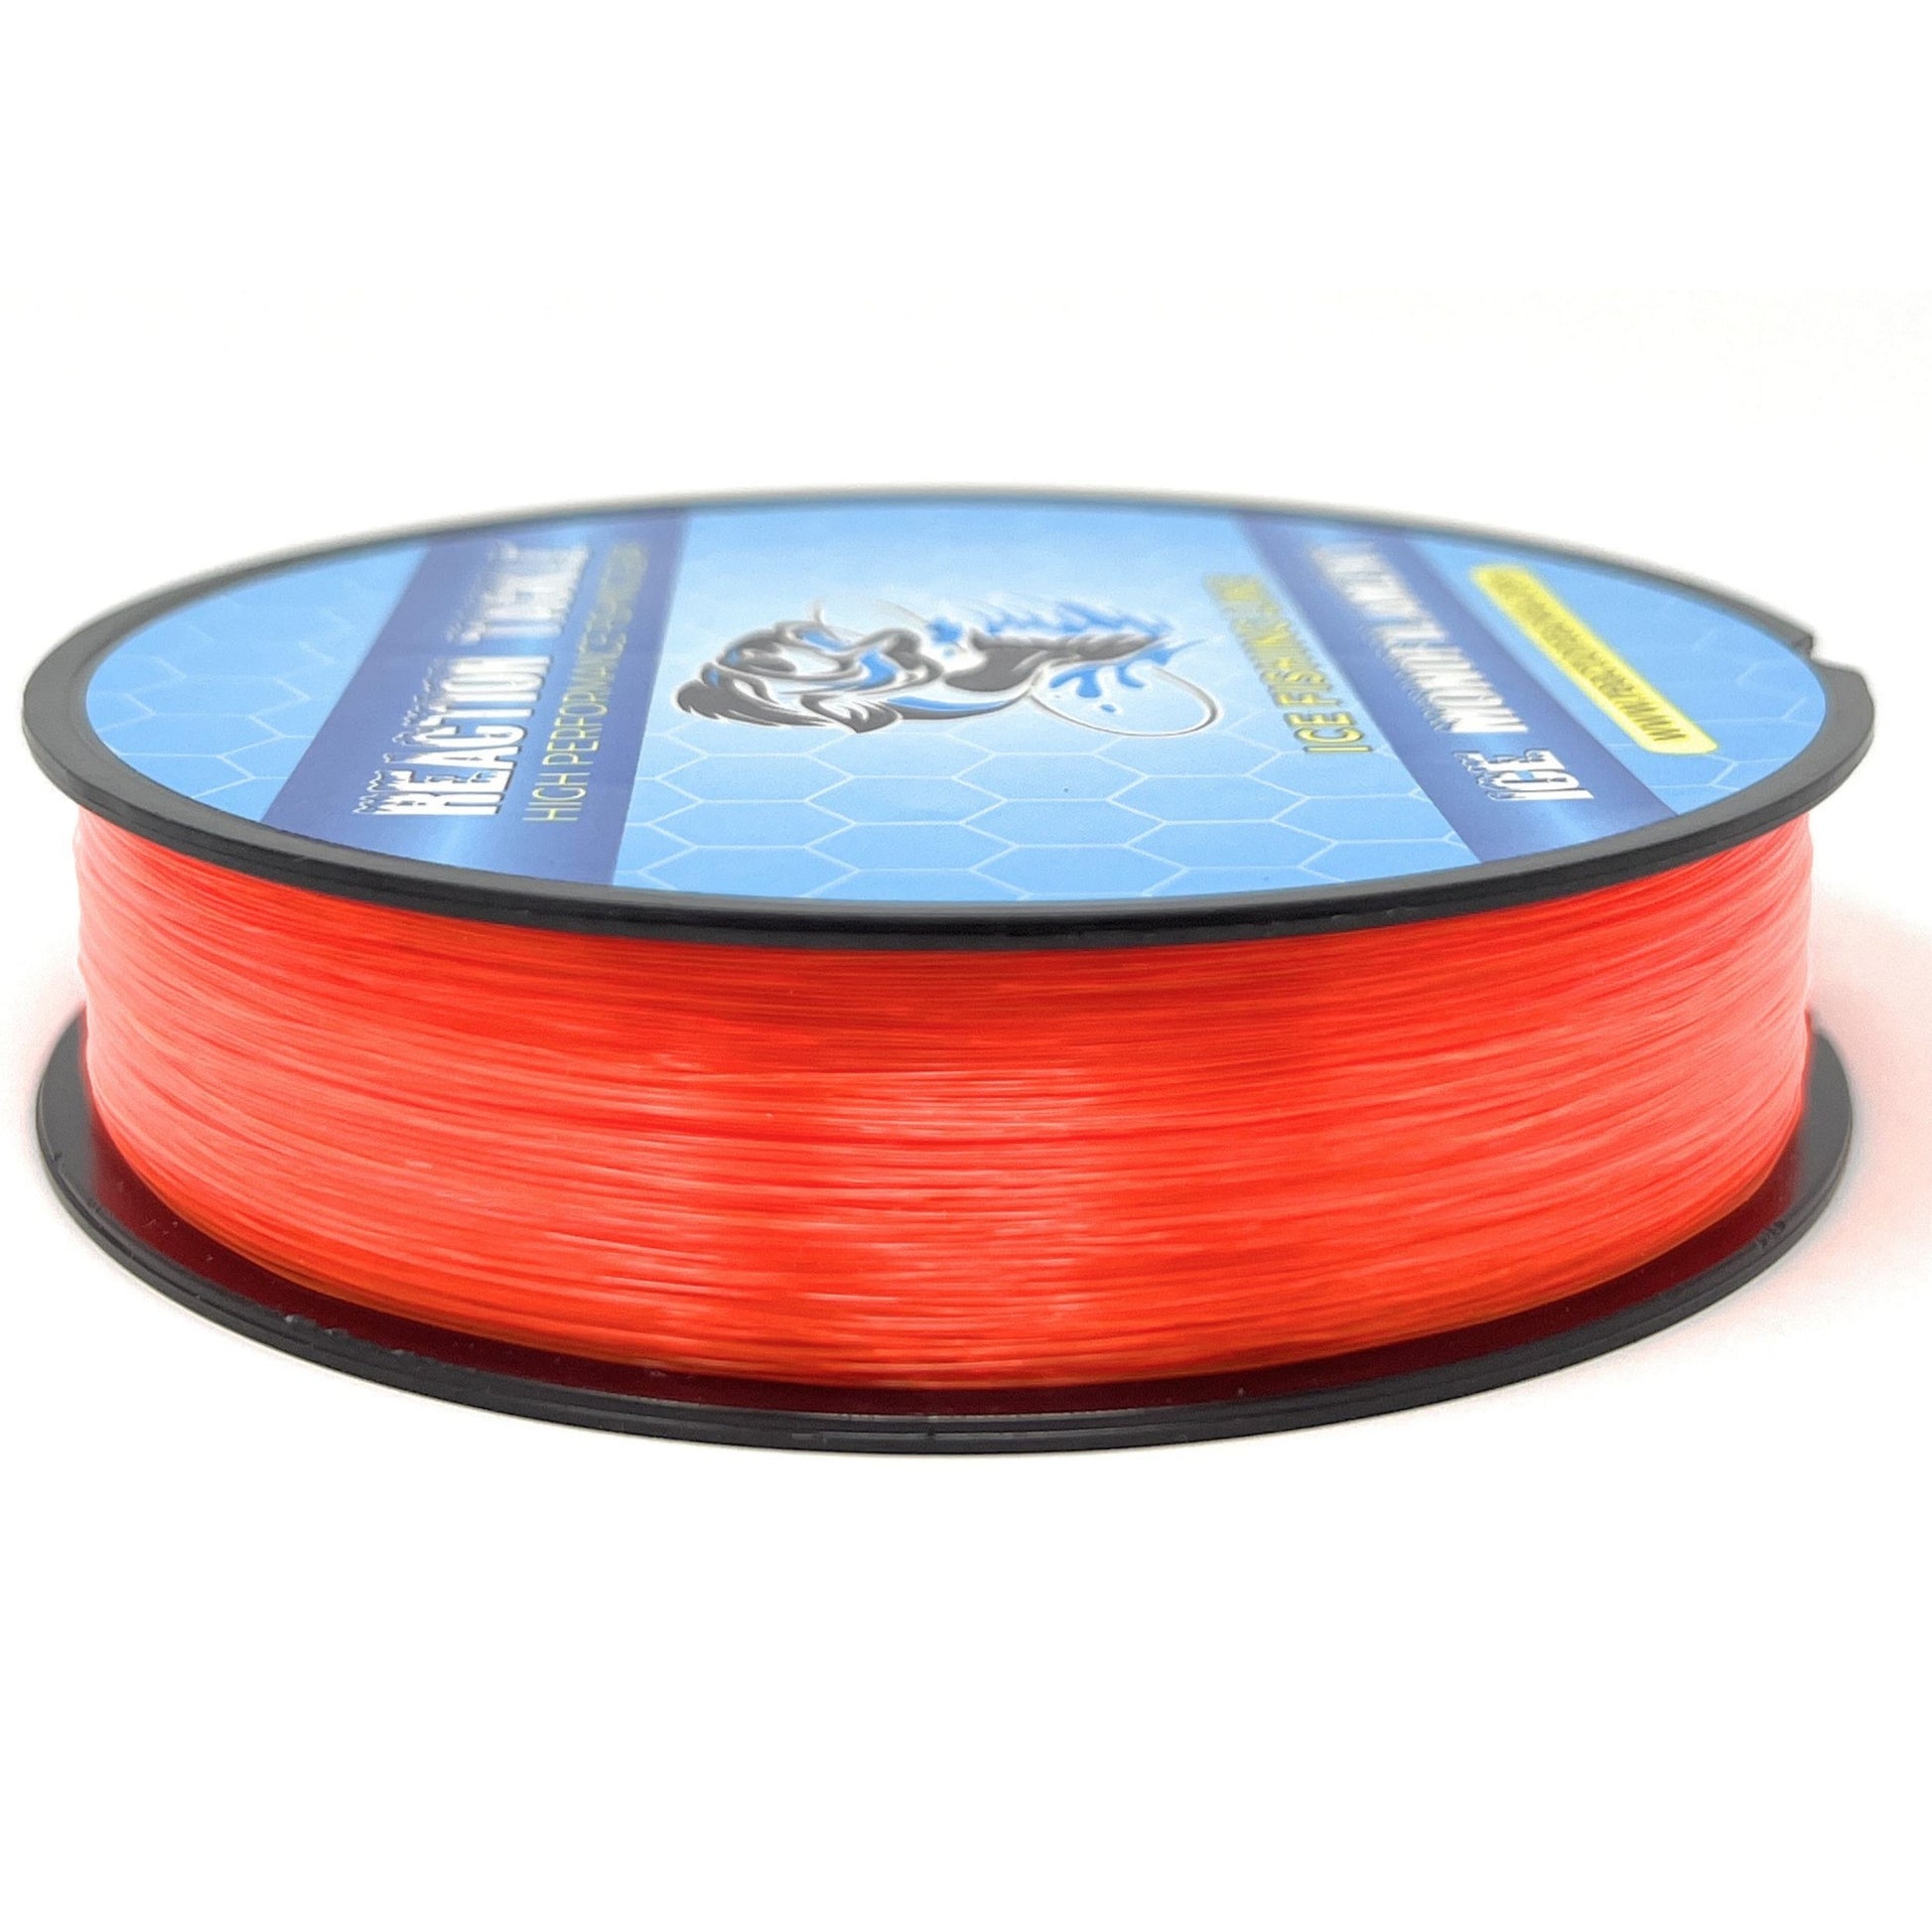 Reaction Tackle Ice Monofilament – Ice Fishing Mono Line, Tip-Up Line